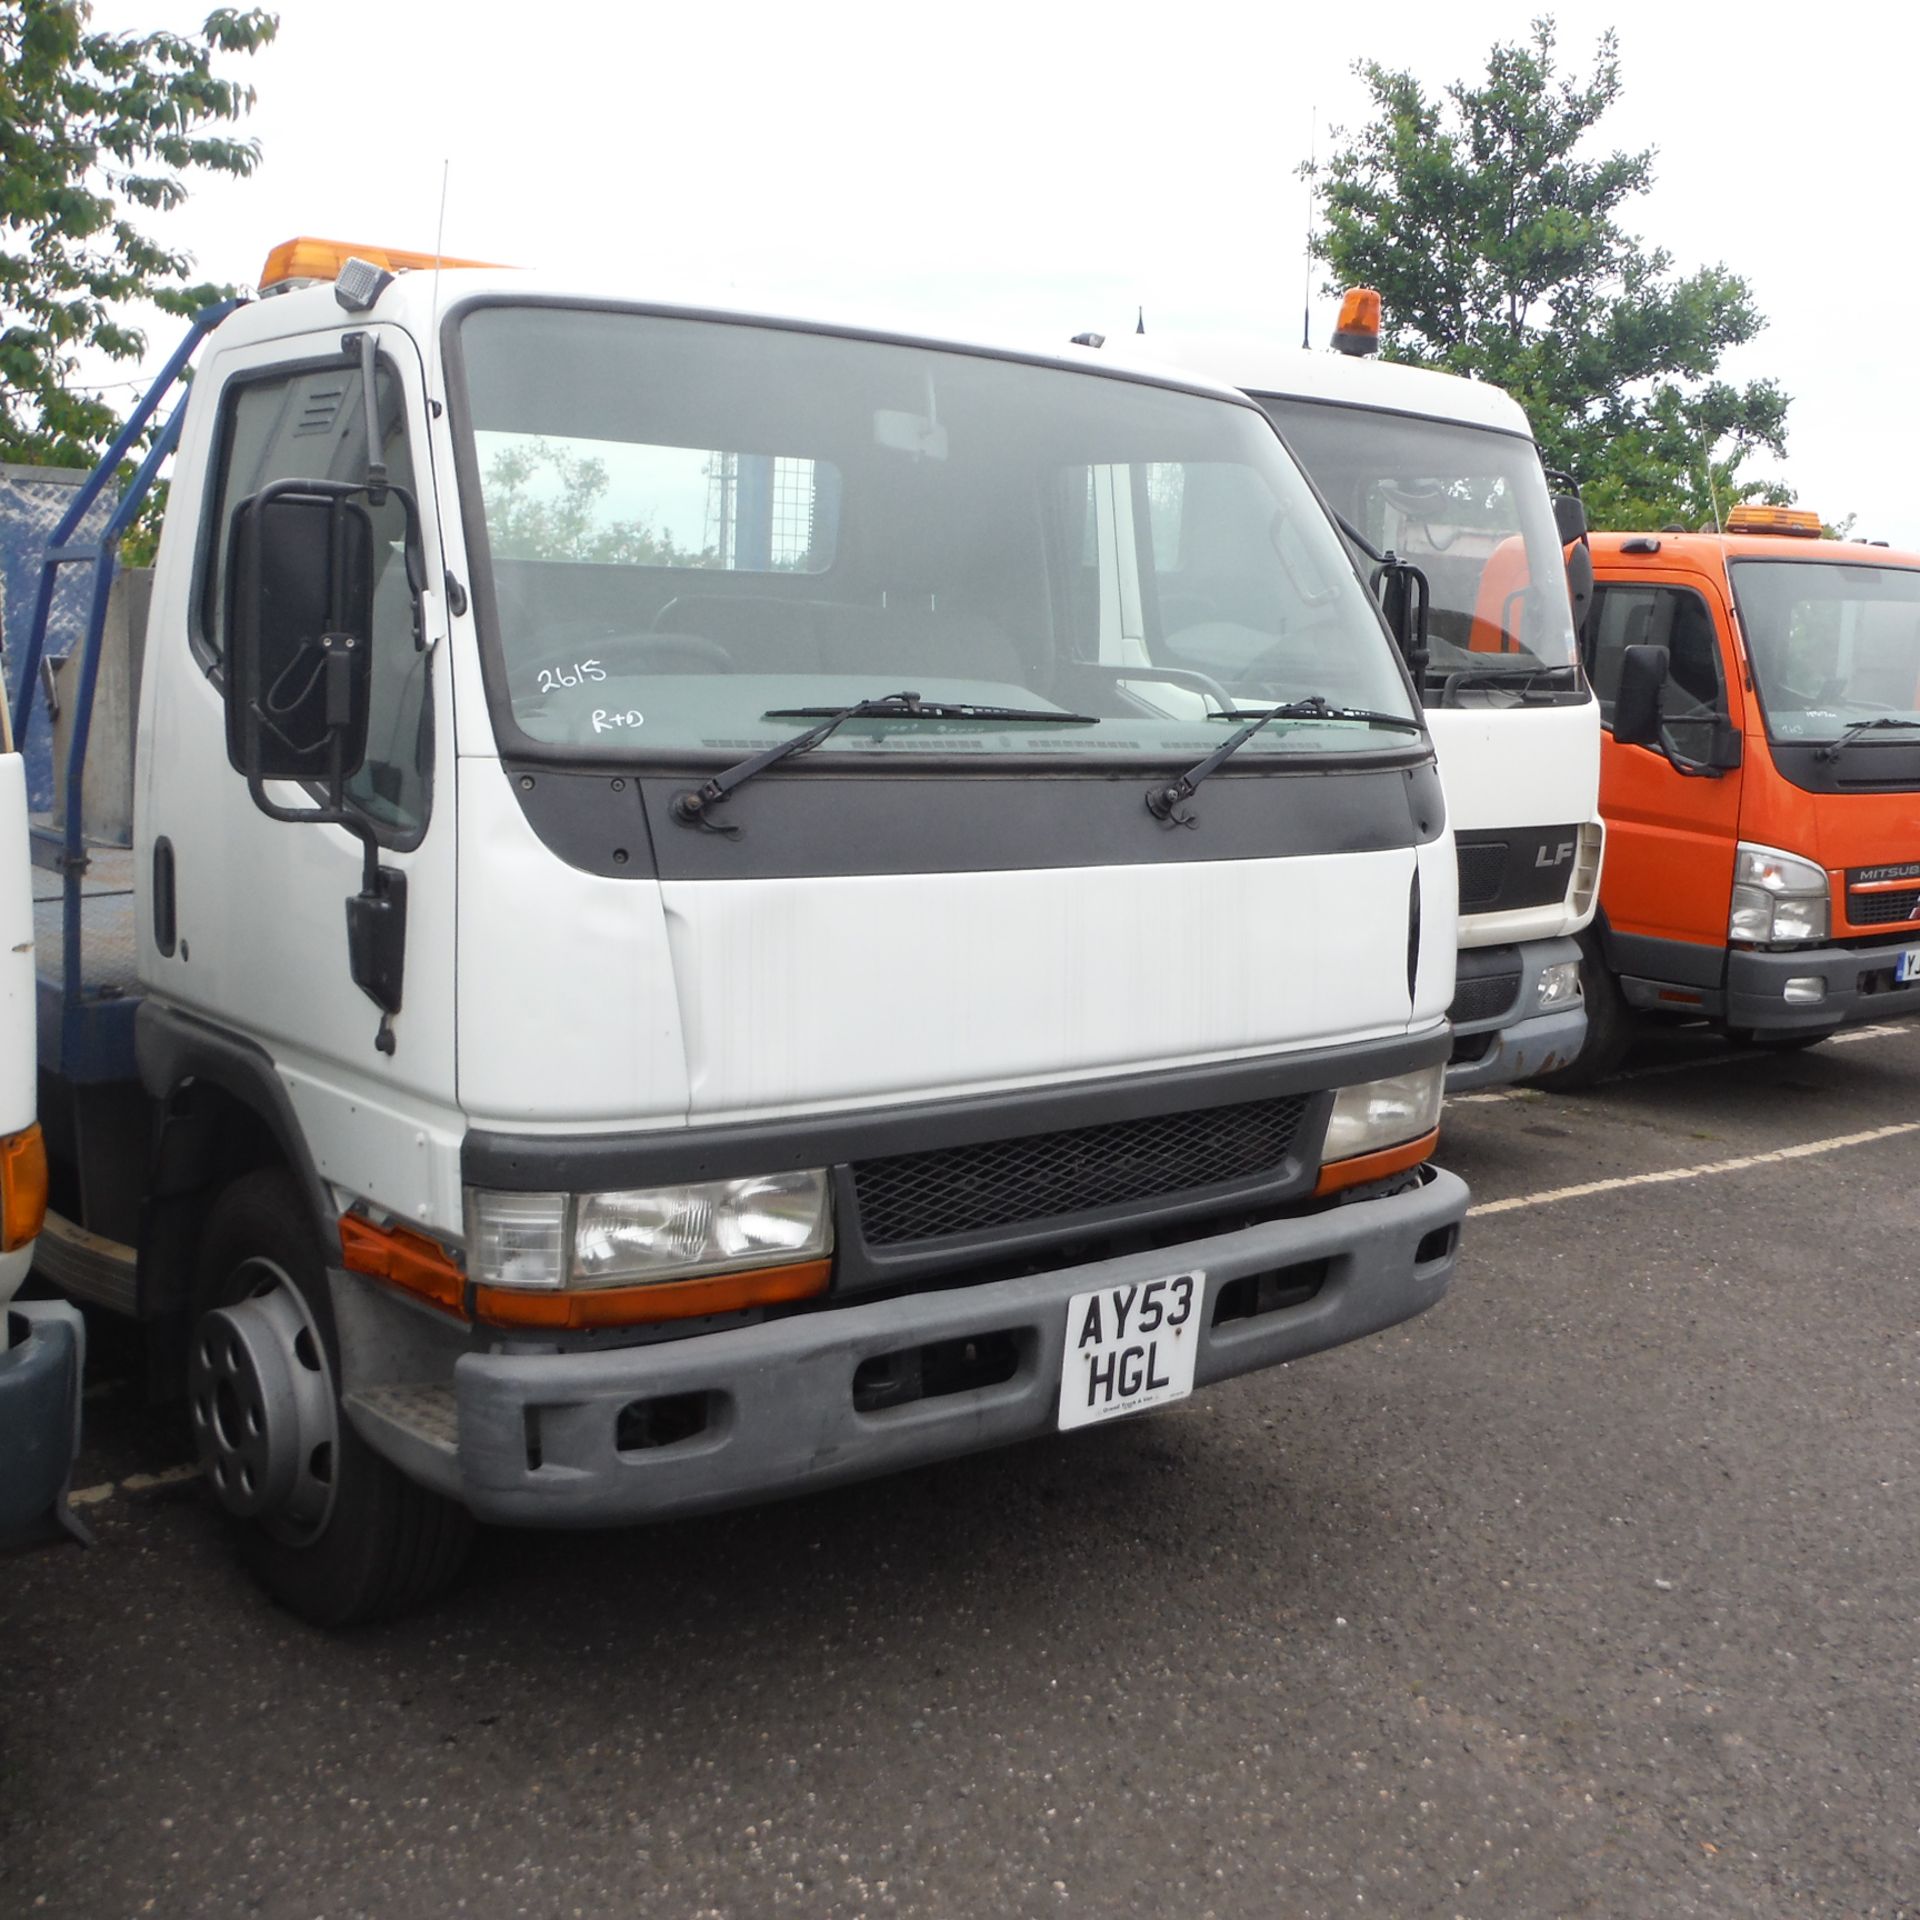 2003 MITSUBISHI CANTER 7.5t beaver tail c/w electric winch (AY53 HGL) (Test May 15)(V5 & Test in